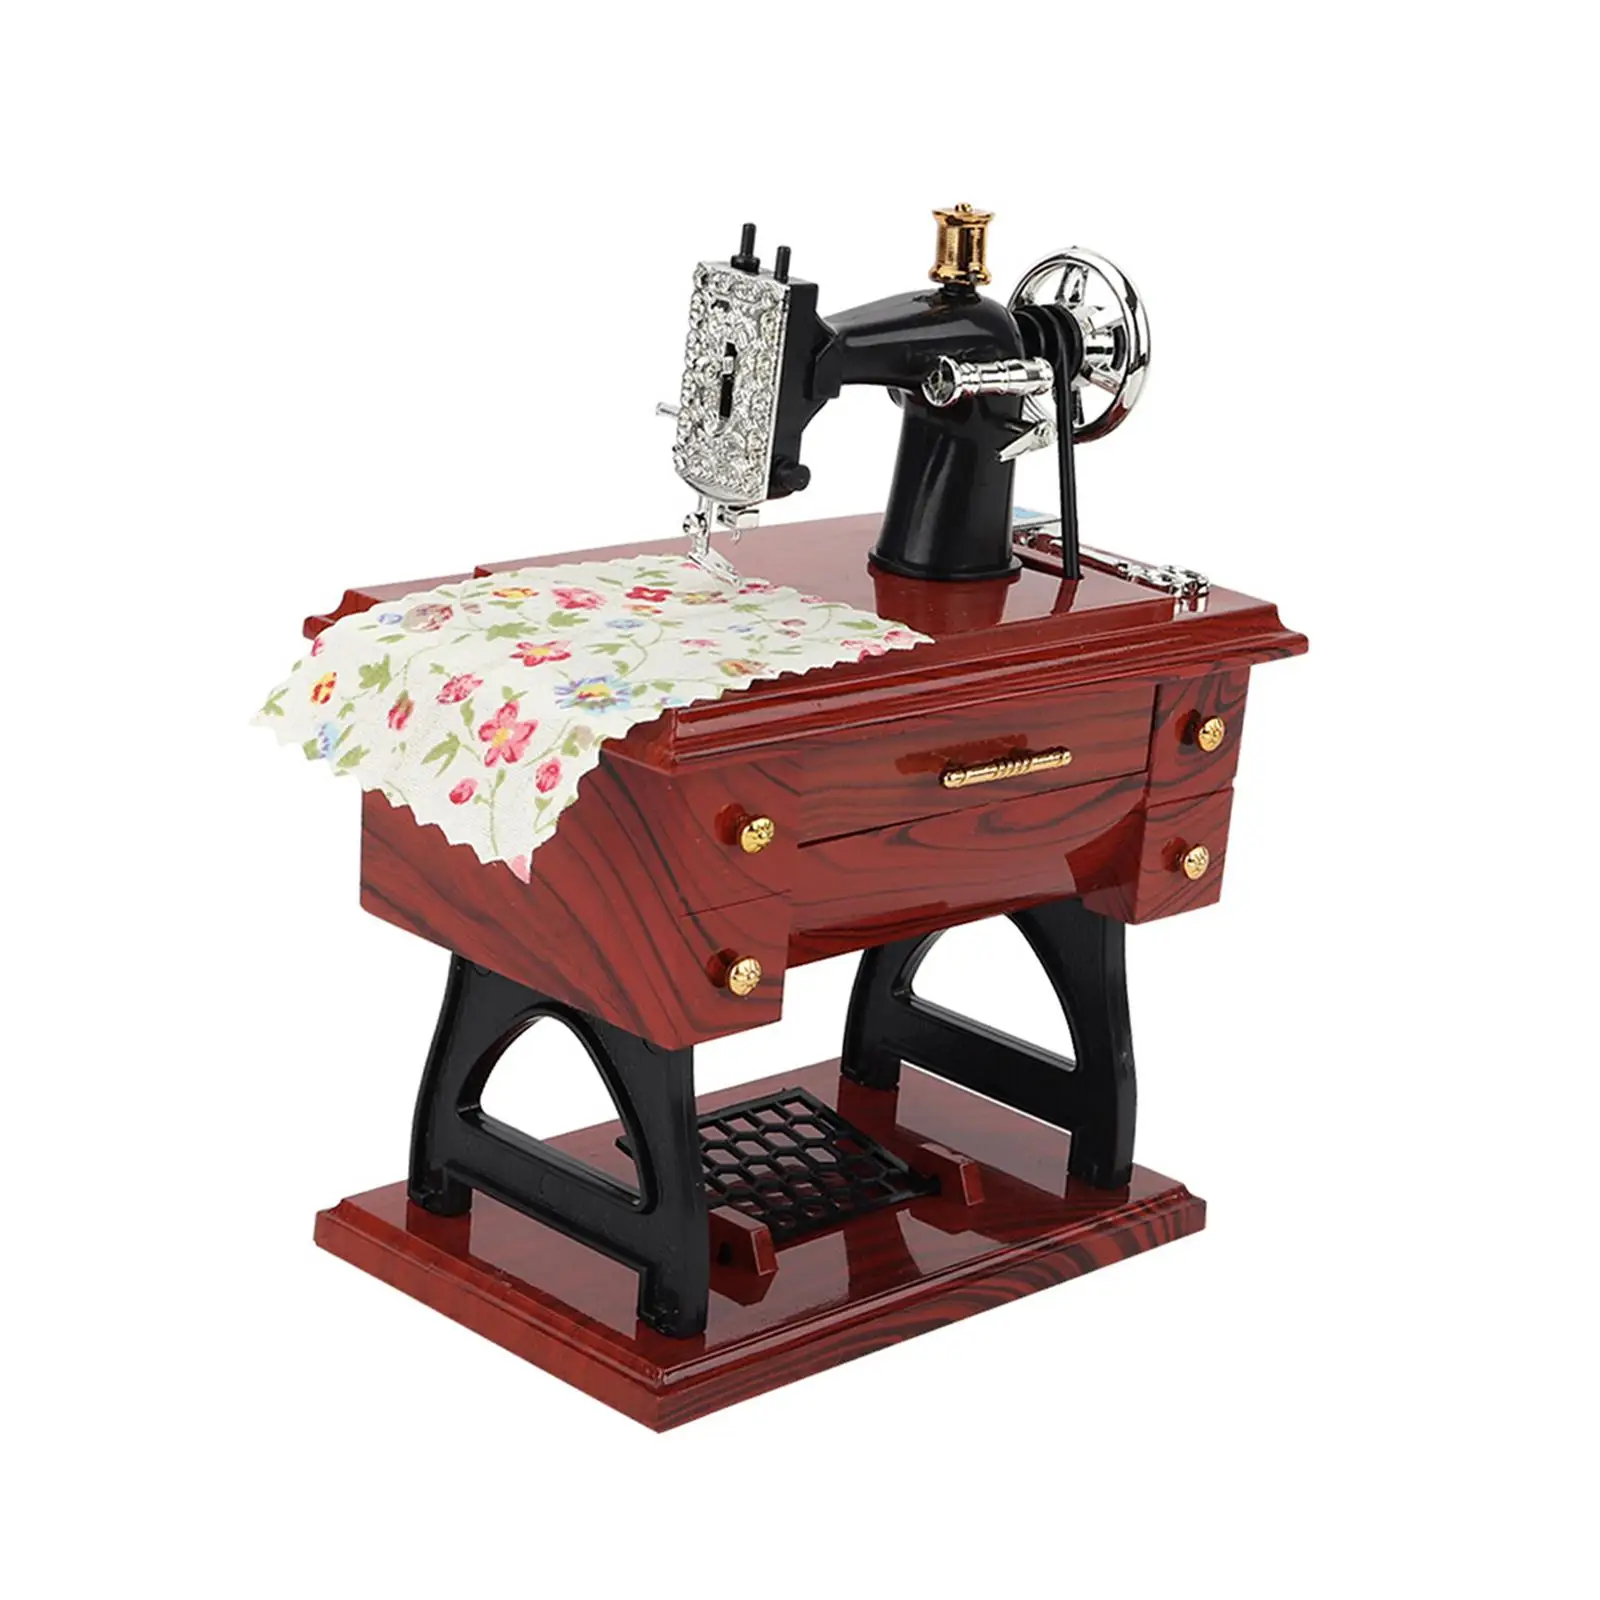 Vintage Sewing Music Box Antique Style Decoration Miniature Figurines Mini Table Decor for Office Wedding Desk Gift New Year